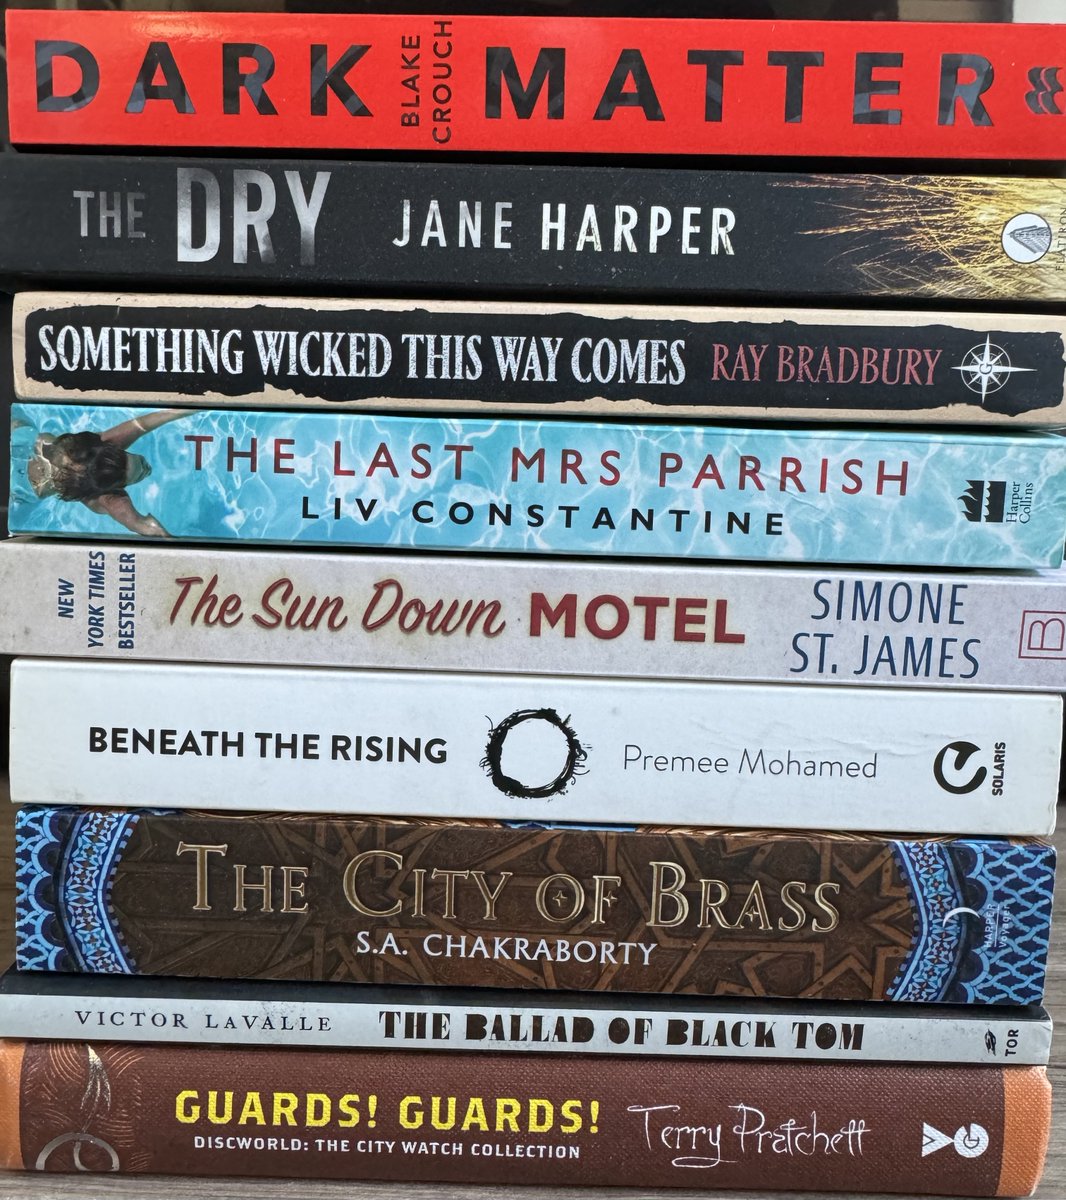 First batch of books from my 'I Bought All the Books' spree has arrived! I spent a day binge-watching my favorite booktubers and ordered (almost) every book they recommended. #Bookhaul video coming up when the rest of the books arrive tomorrow! #amreading #BookTwitter #book